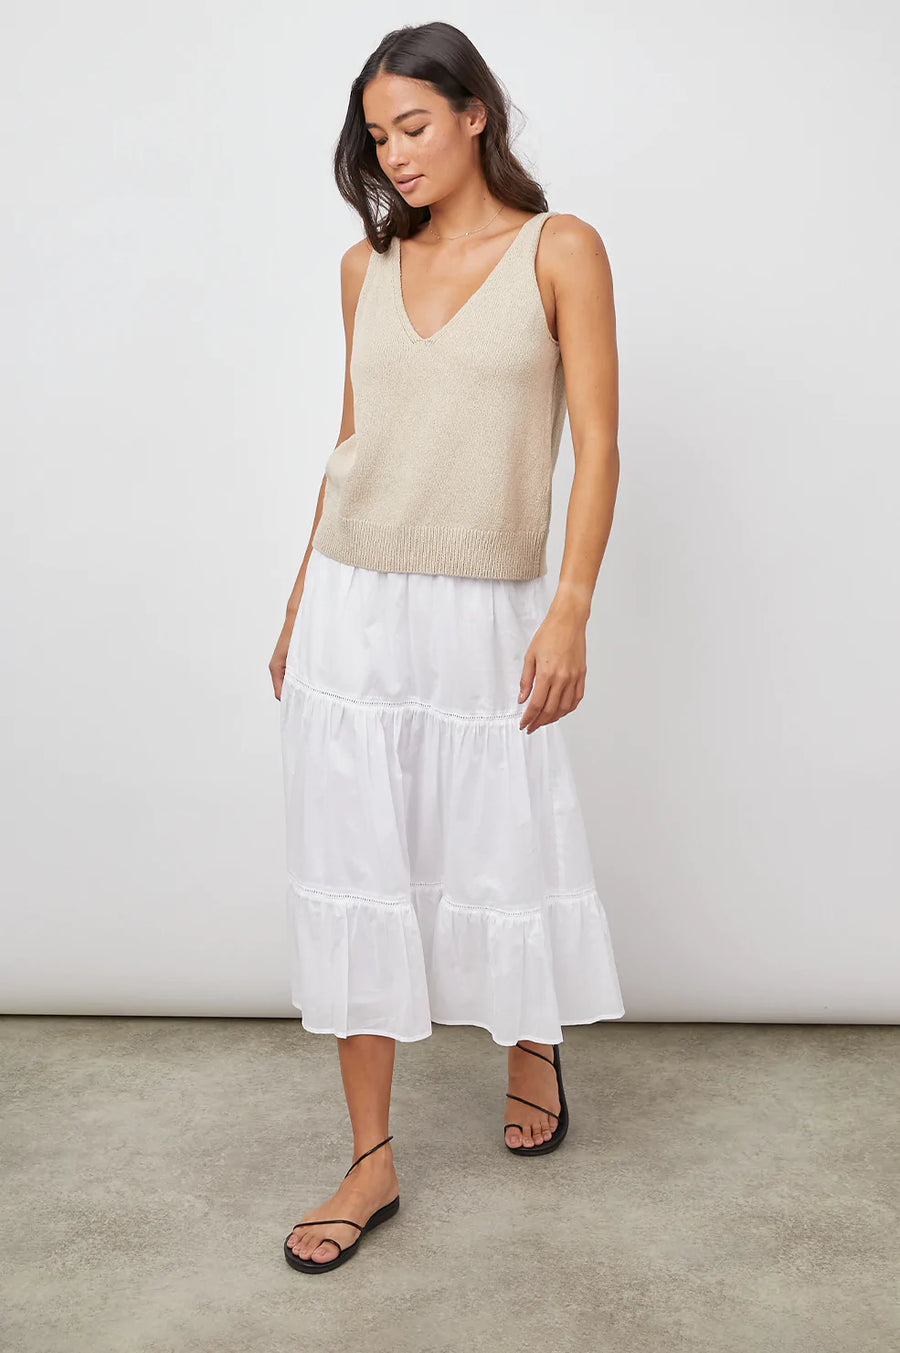 RAILS Maise Knit Tank in Color: 